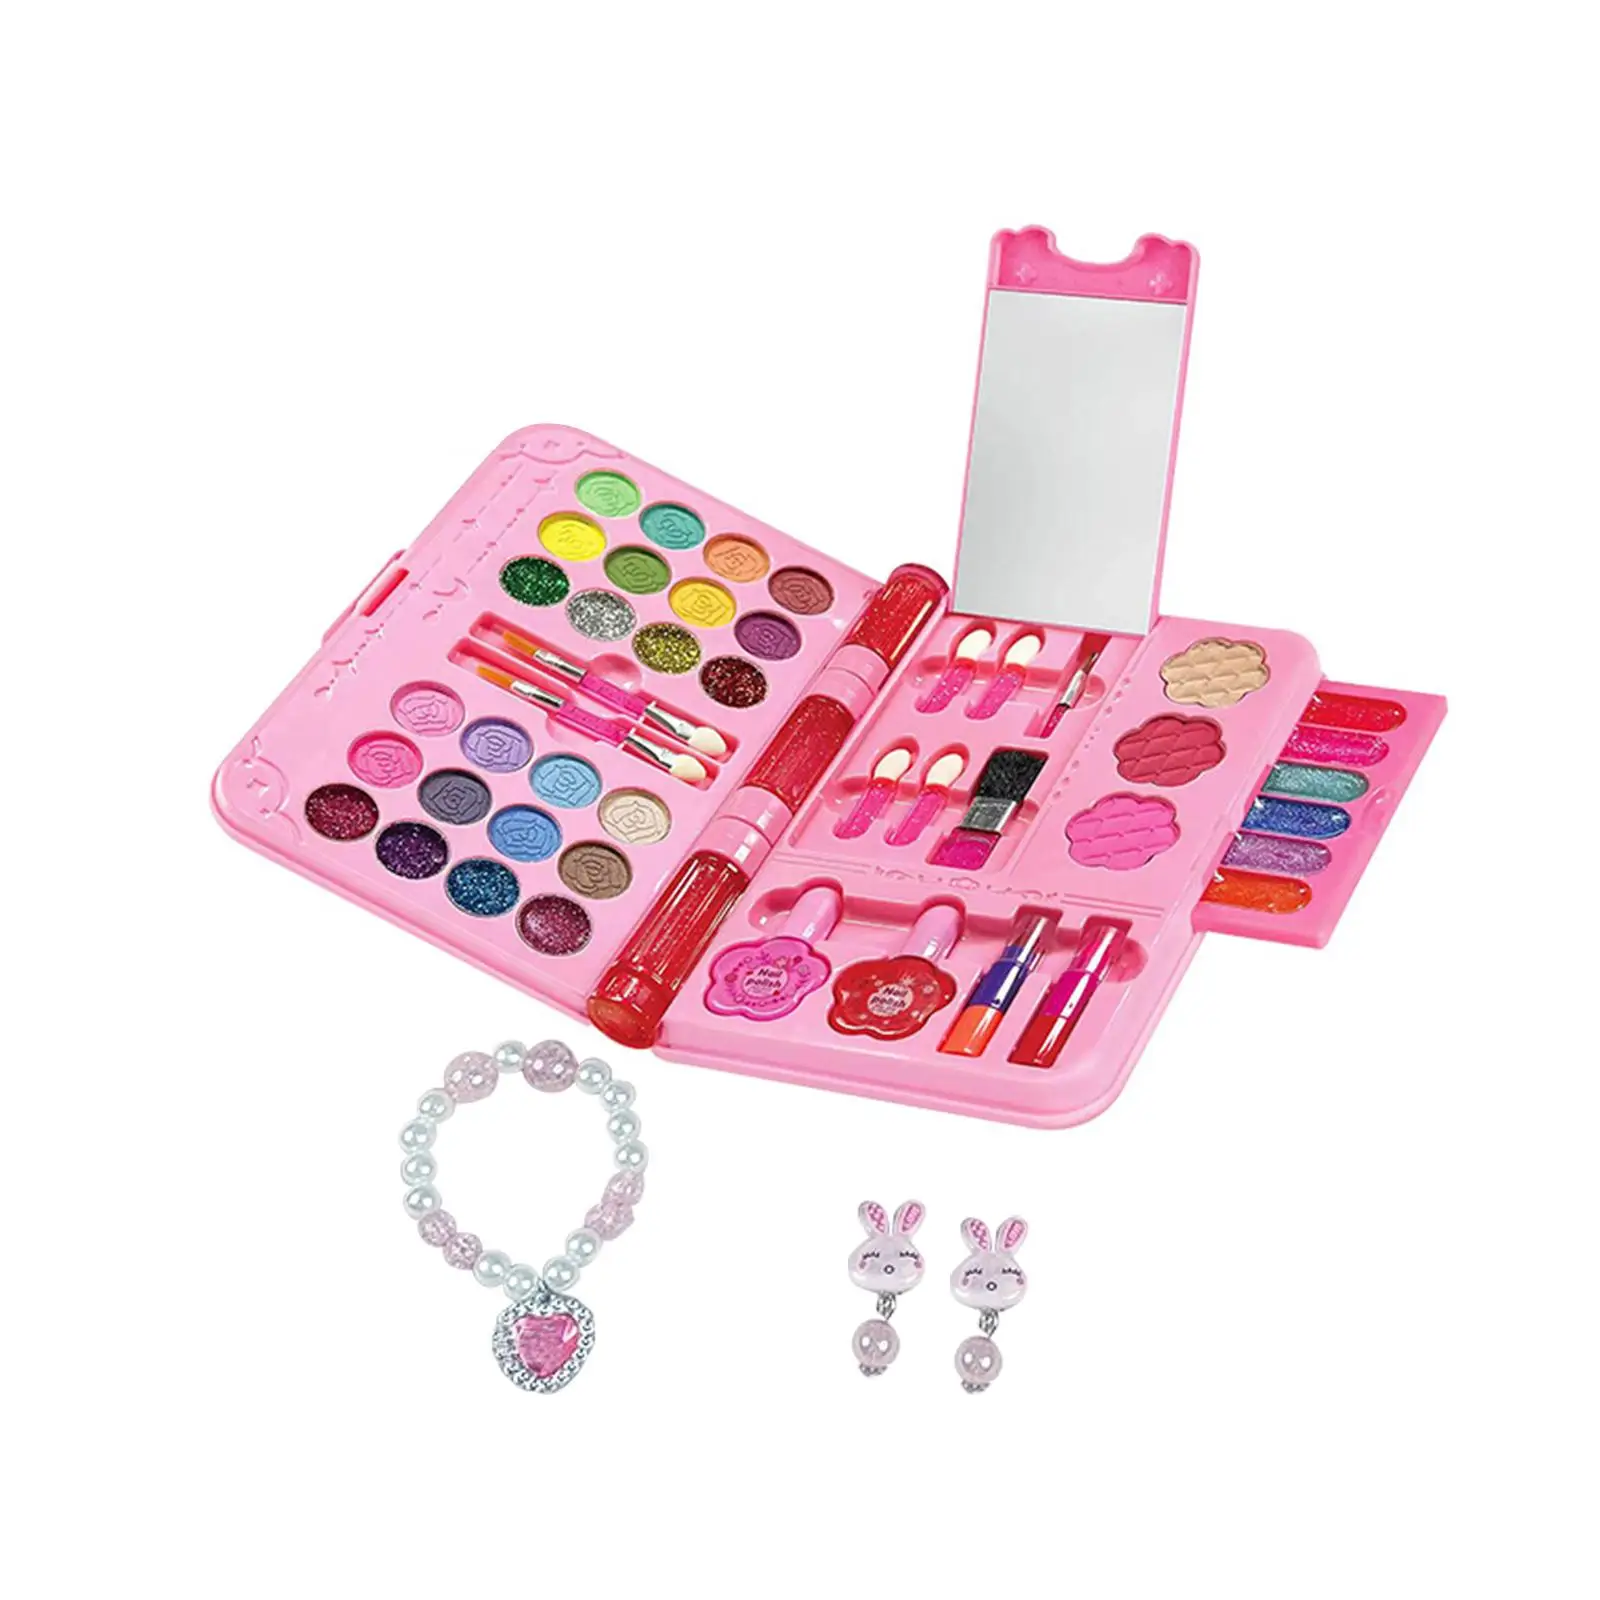 Kids Makeup Set Cosmetics Makeup Toy Set Washable Makeup Beauty Box Pretend Play Makeup Toy Set for Girls Toddlers Children